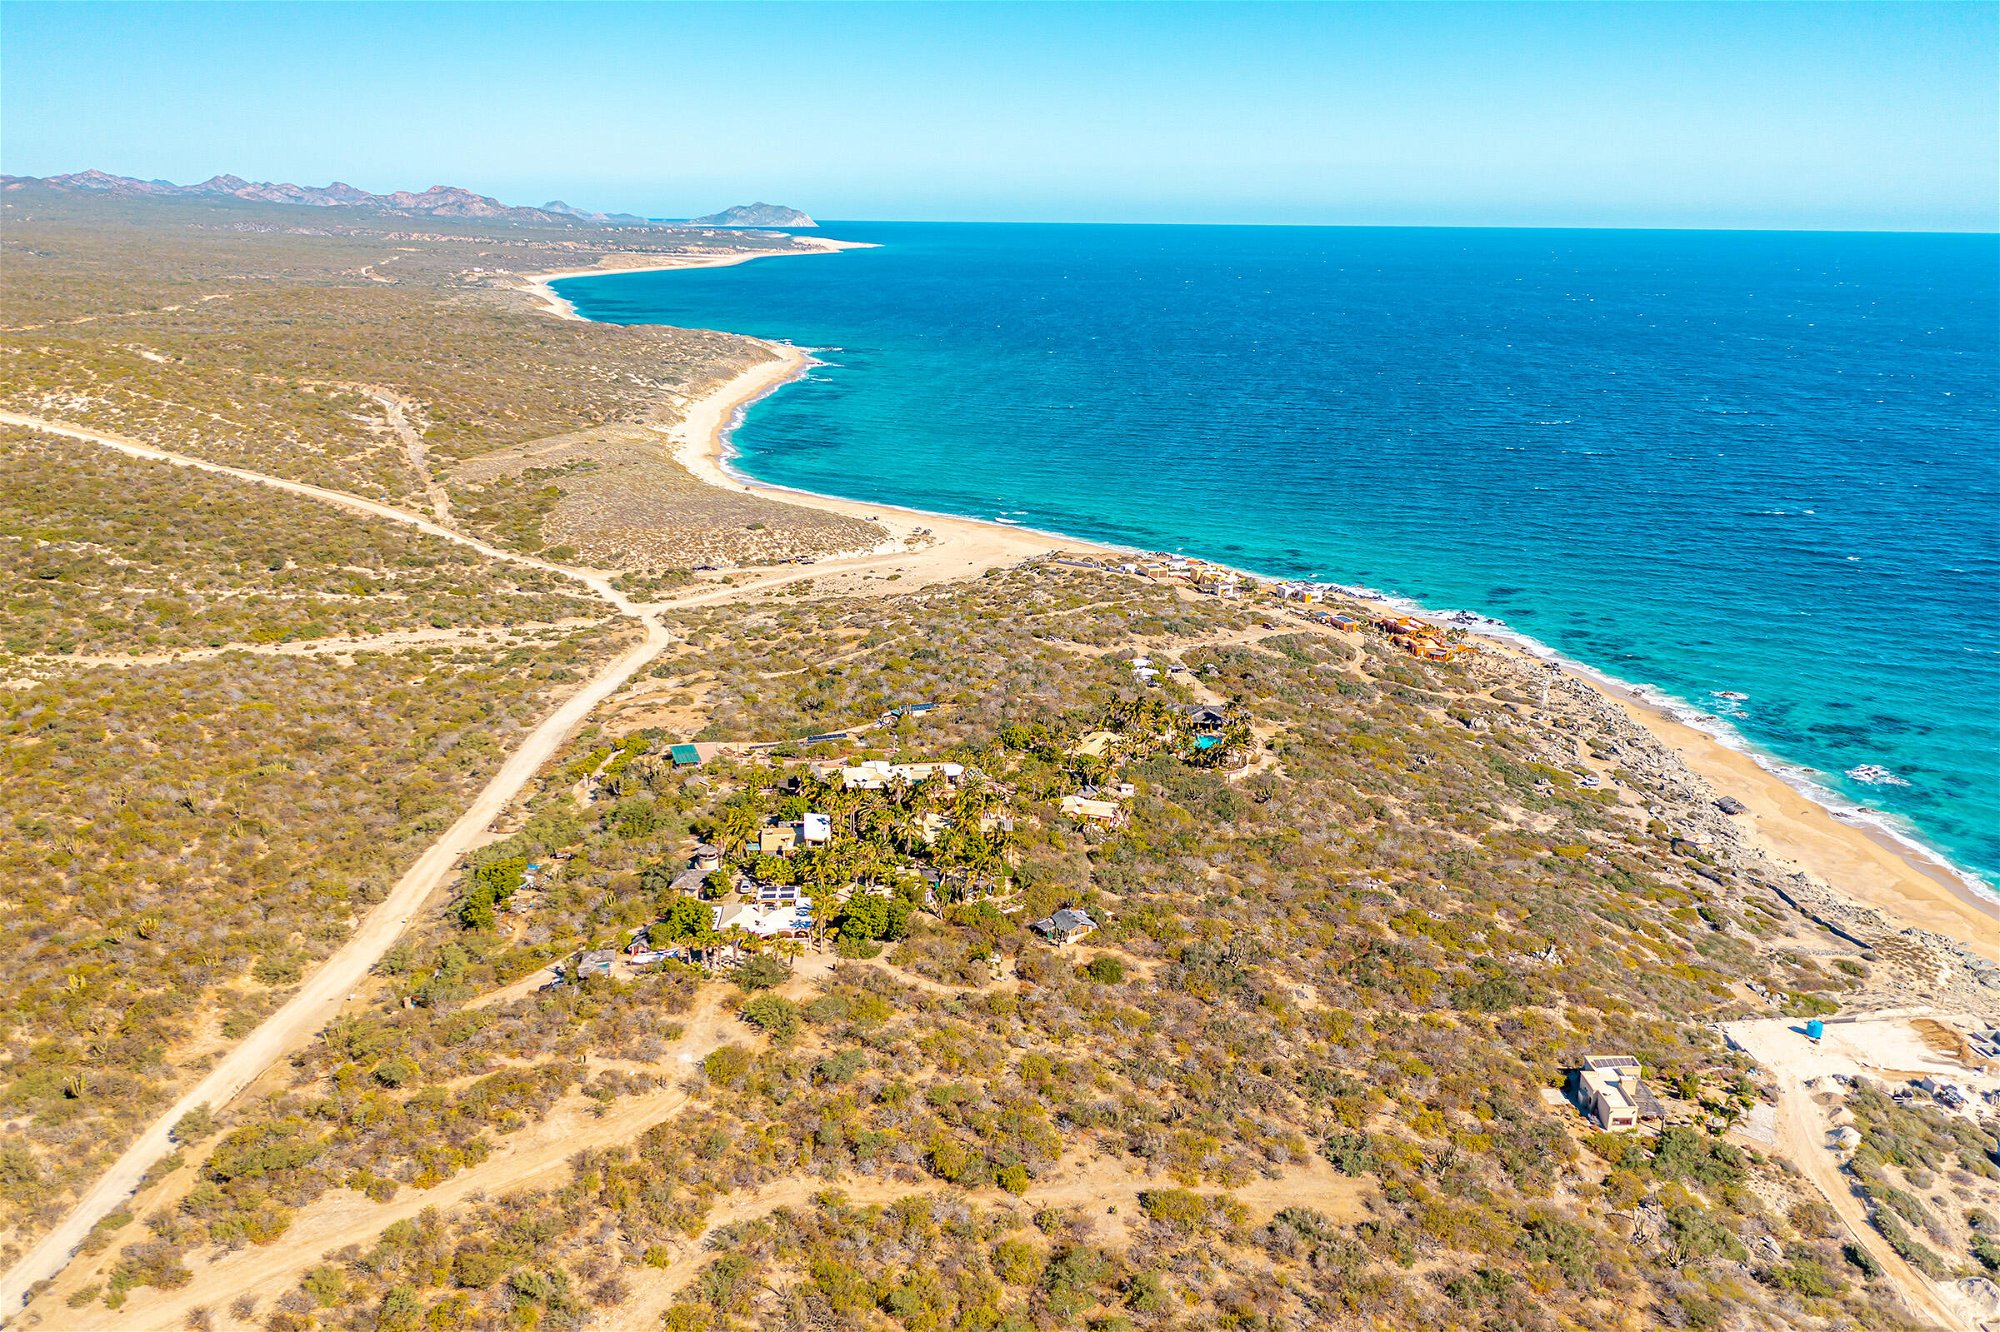 Land For Sale in Cabo San Lucas 440203415